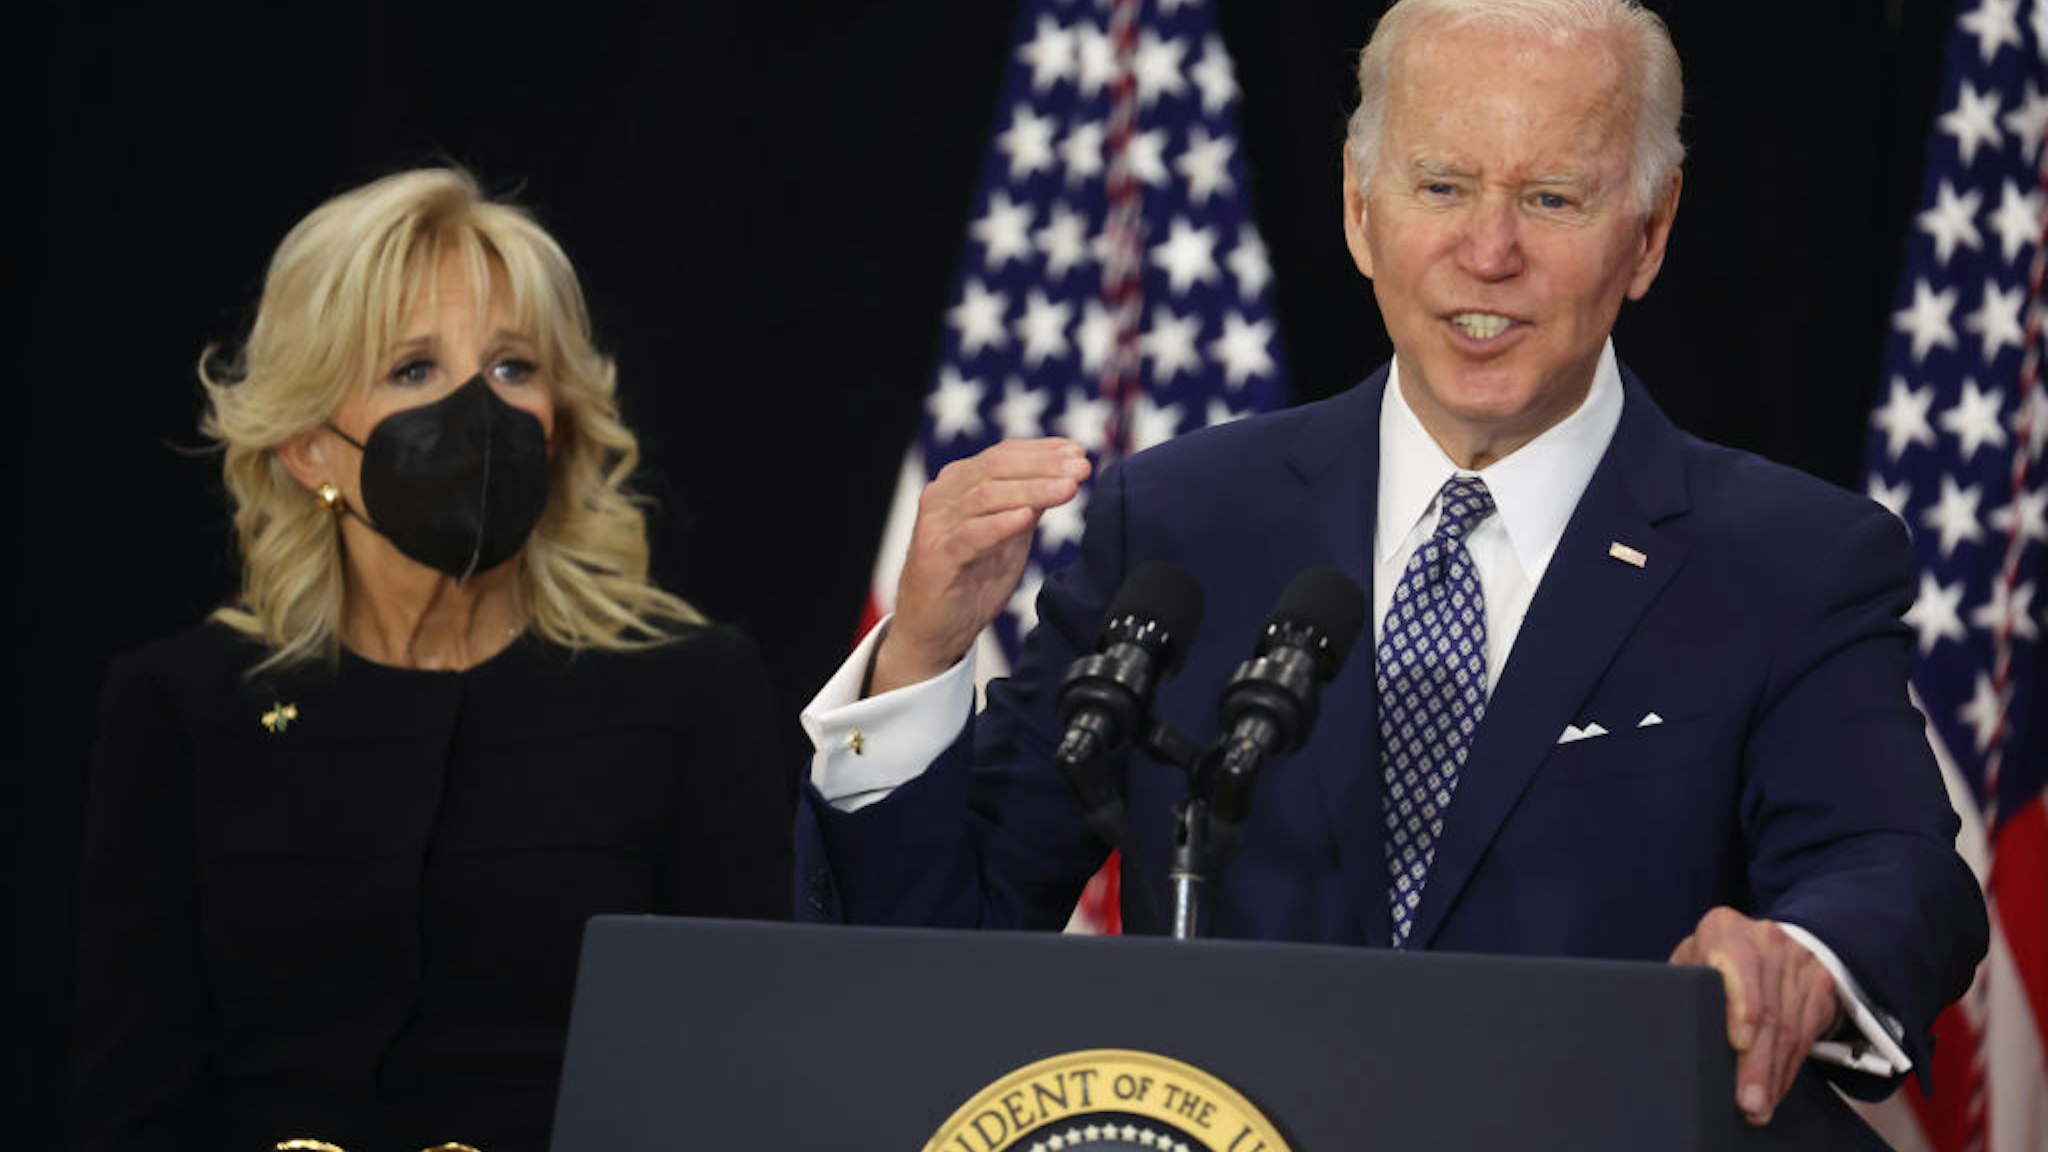 BUFFALO, NEW YORK - MAY 17: With his wife Jill by his side, US President Joe Biden delivers remarks to guests, most of whom lost a family member in the Tops market shooting, at the Delavan Grider Community Center on May 17, 2022 in Buffalo, New York. The president and first lady placed flowers at a memorial outside of the Tops market and met with families of victims prior to addressing the guests at the community center. A gunman opened fire at the Tops market on Saturday killing ten people and wounding another three. The attack was believed to be motivated by racial hatred. (Photo by Scott Olson/Getty Images)